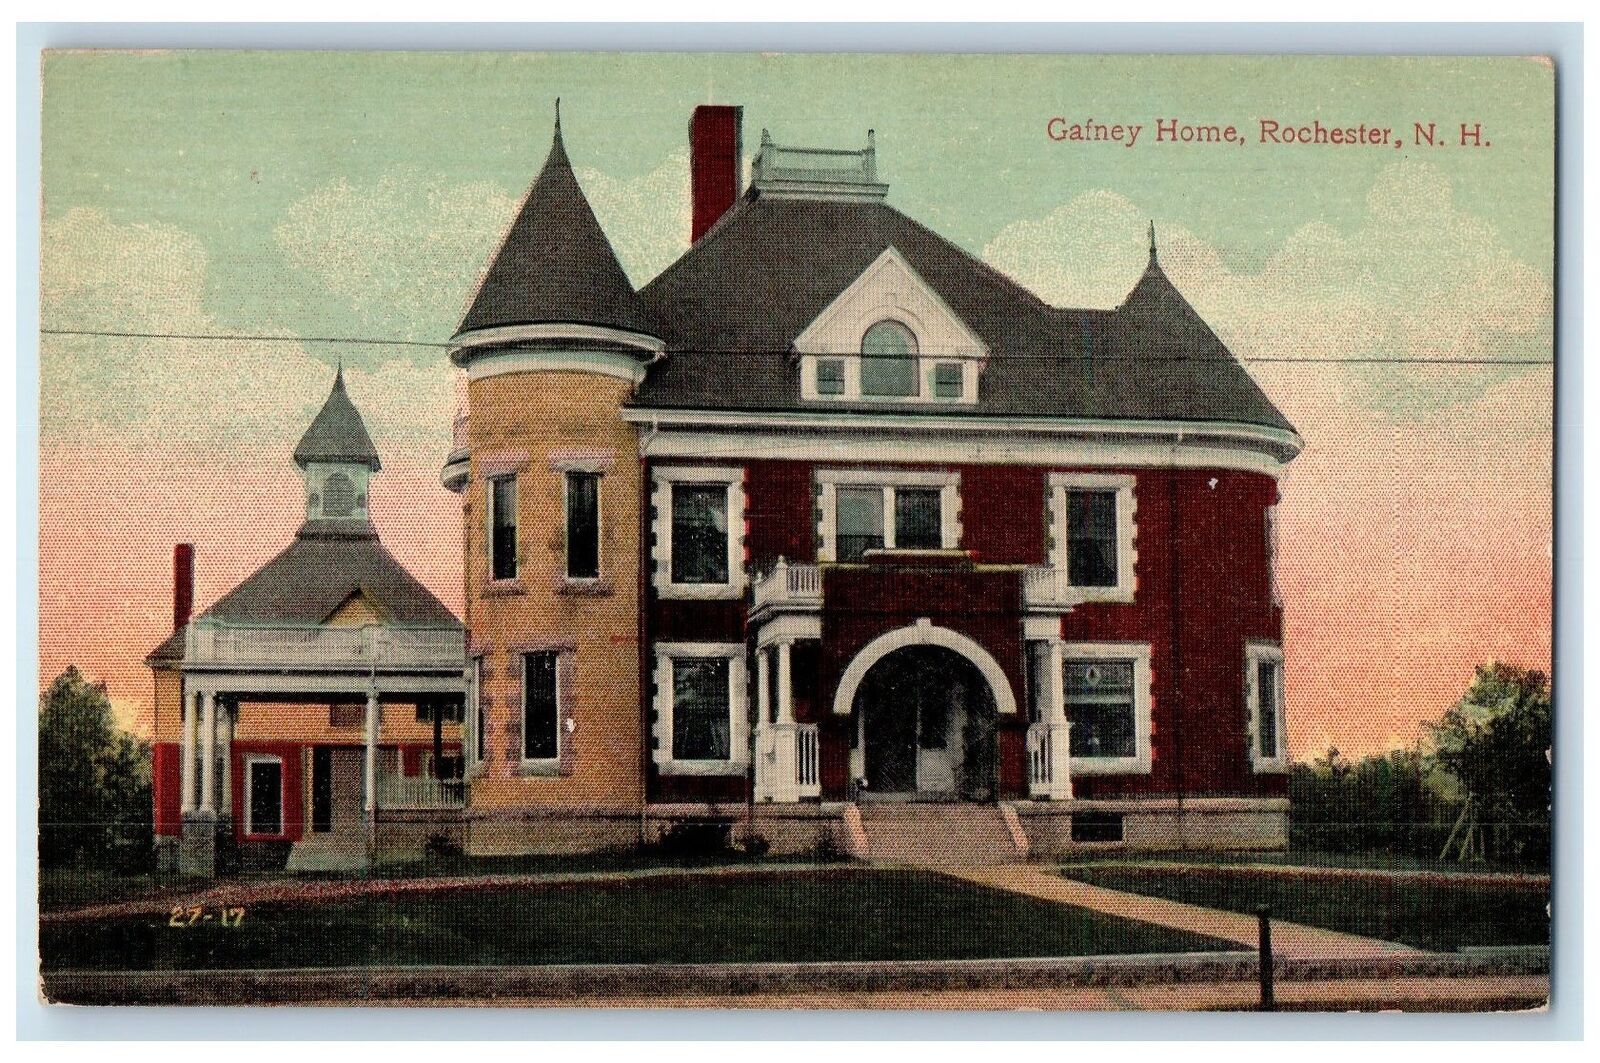 c1950 Gafney Home View House Stairs Terrace Rochester New Hampshire NH Postcard